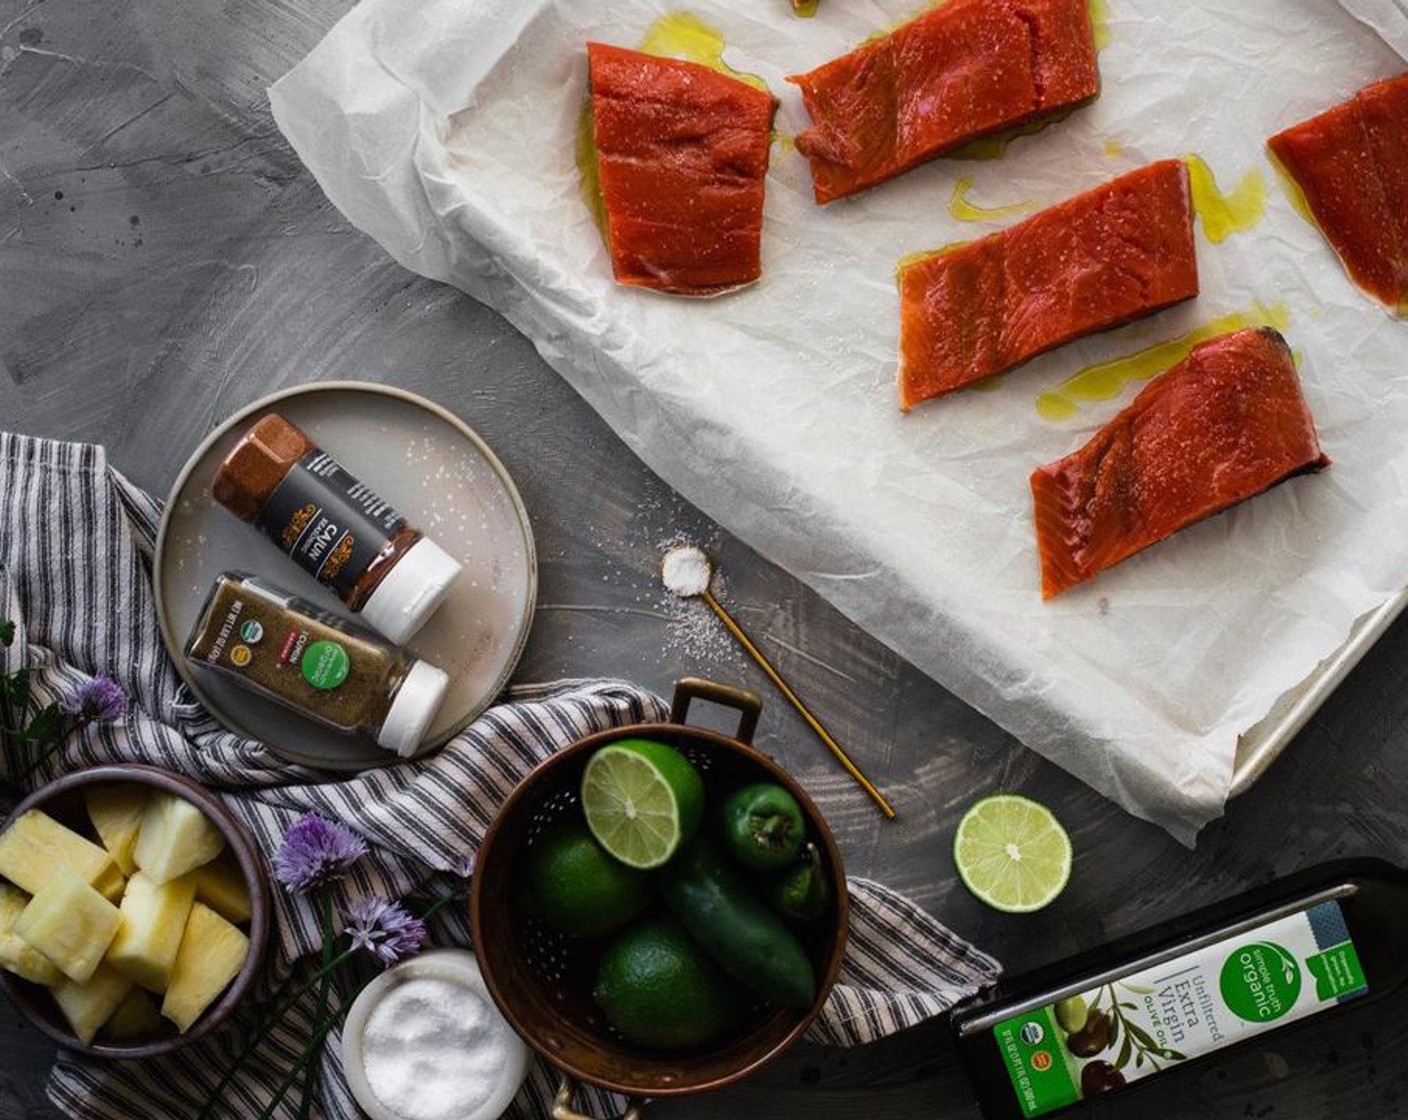 step 2 Place Copper River Sockeye Salmon (1) fillets on parchment paper or an aluminum foil-lined baking sheet. Drizzle filets with Extra-Virgin Olive Oil (1/4 cup), half a Lime (1), and Honey (1 Tbsp) and rub into the salmon fillets.